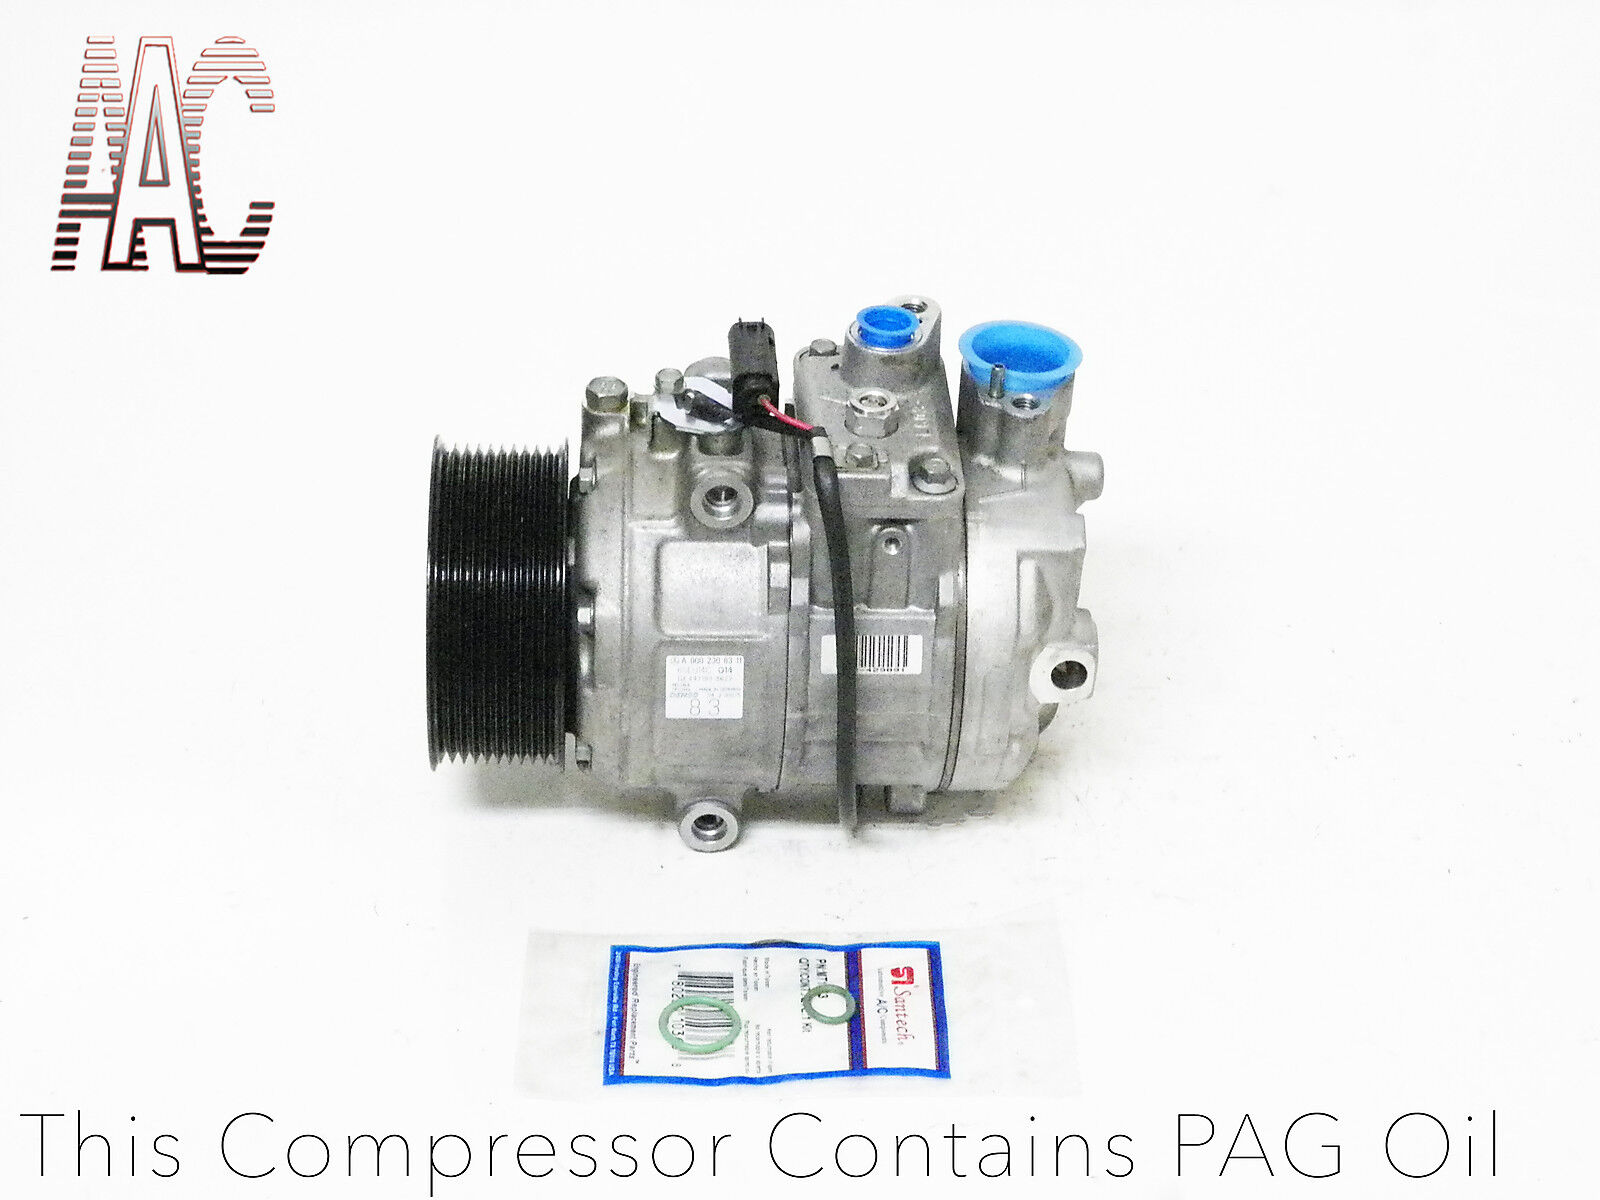 2008 MERCEDES MAYBACH 62 USA REMANUFACTURED A/C COMPRESSOR WITH WARRANTY